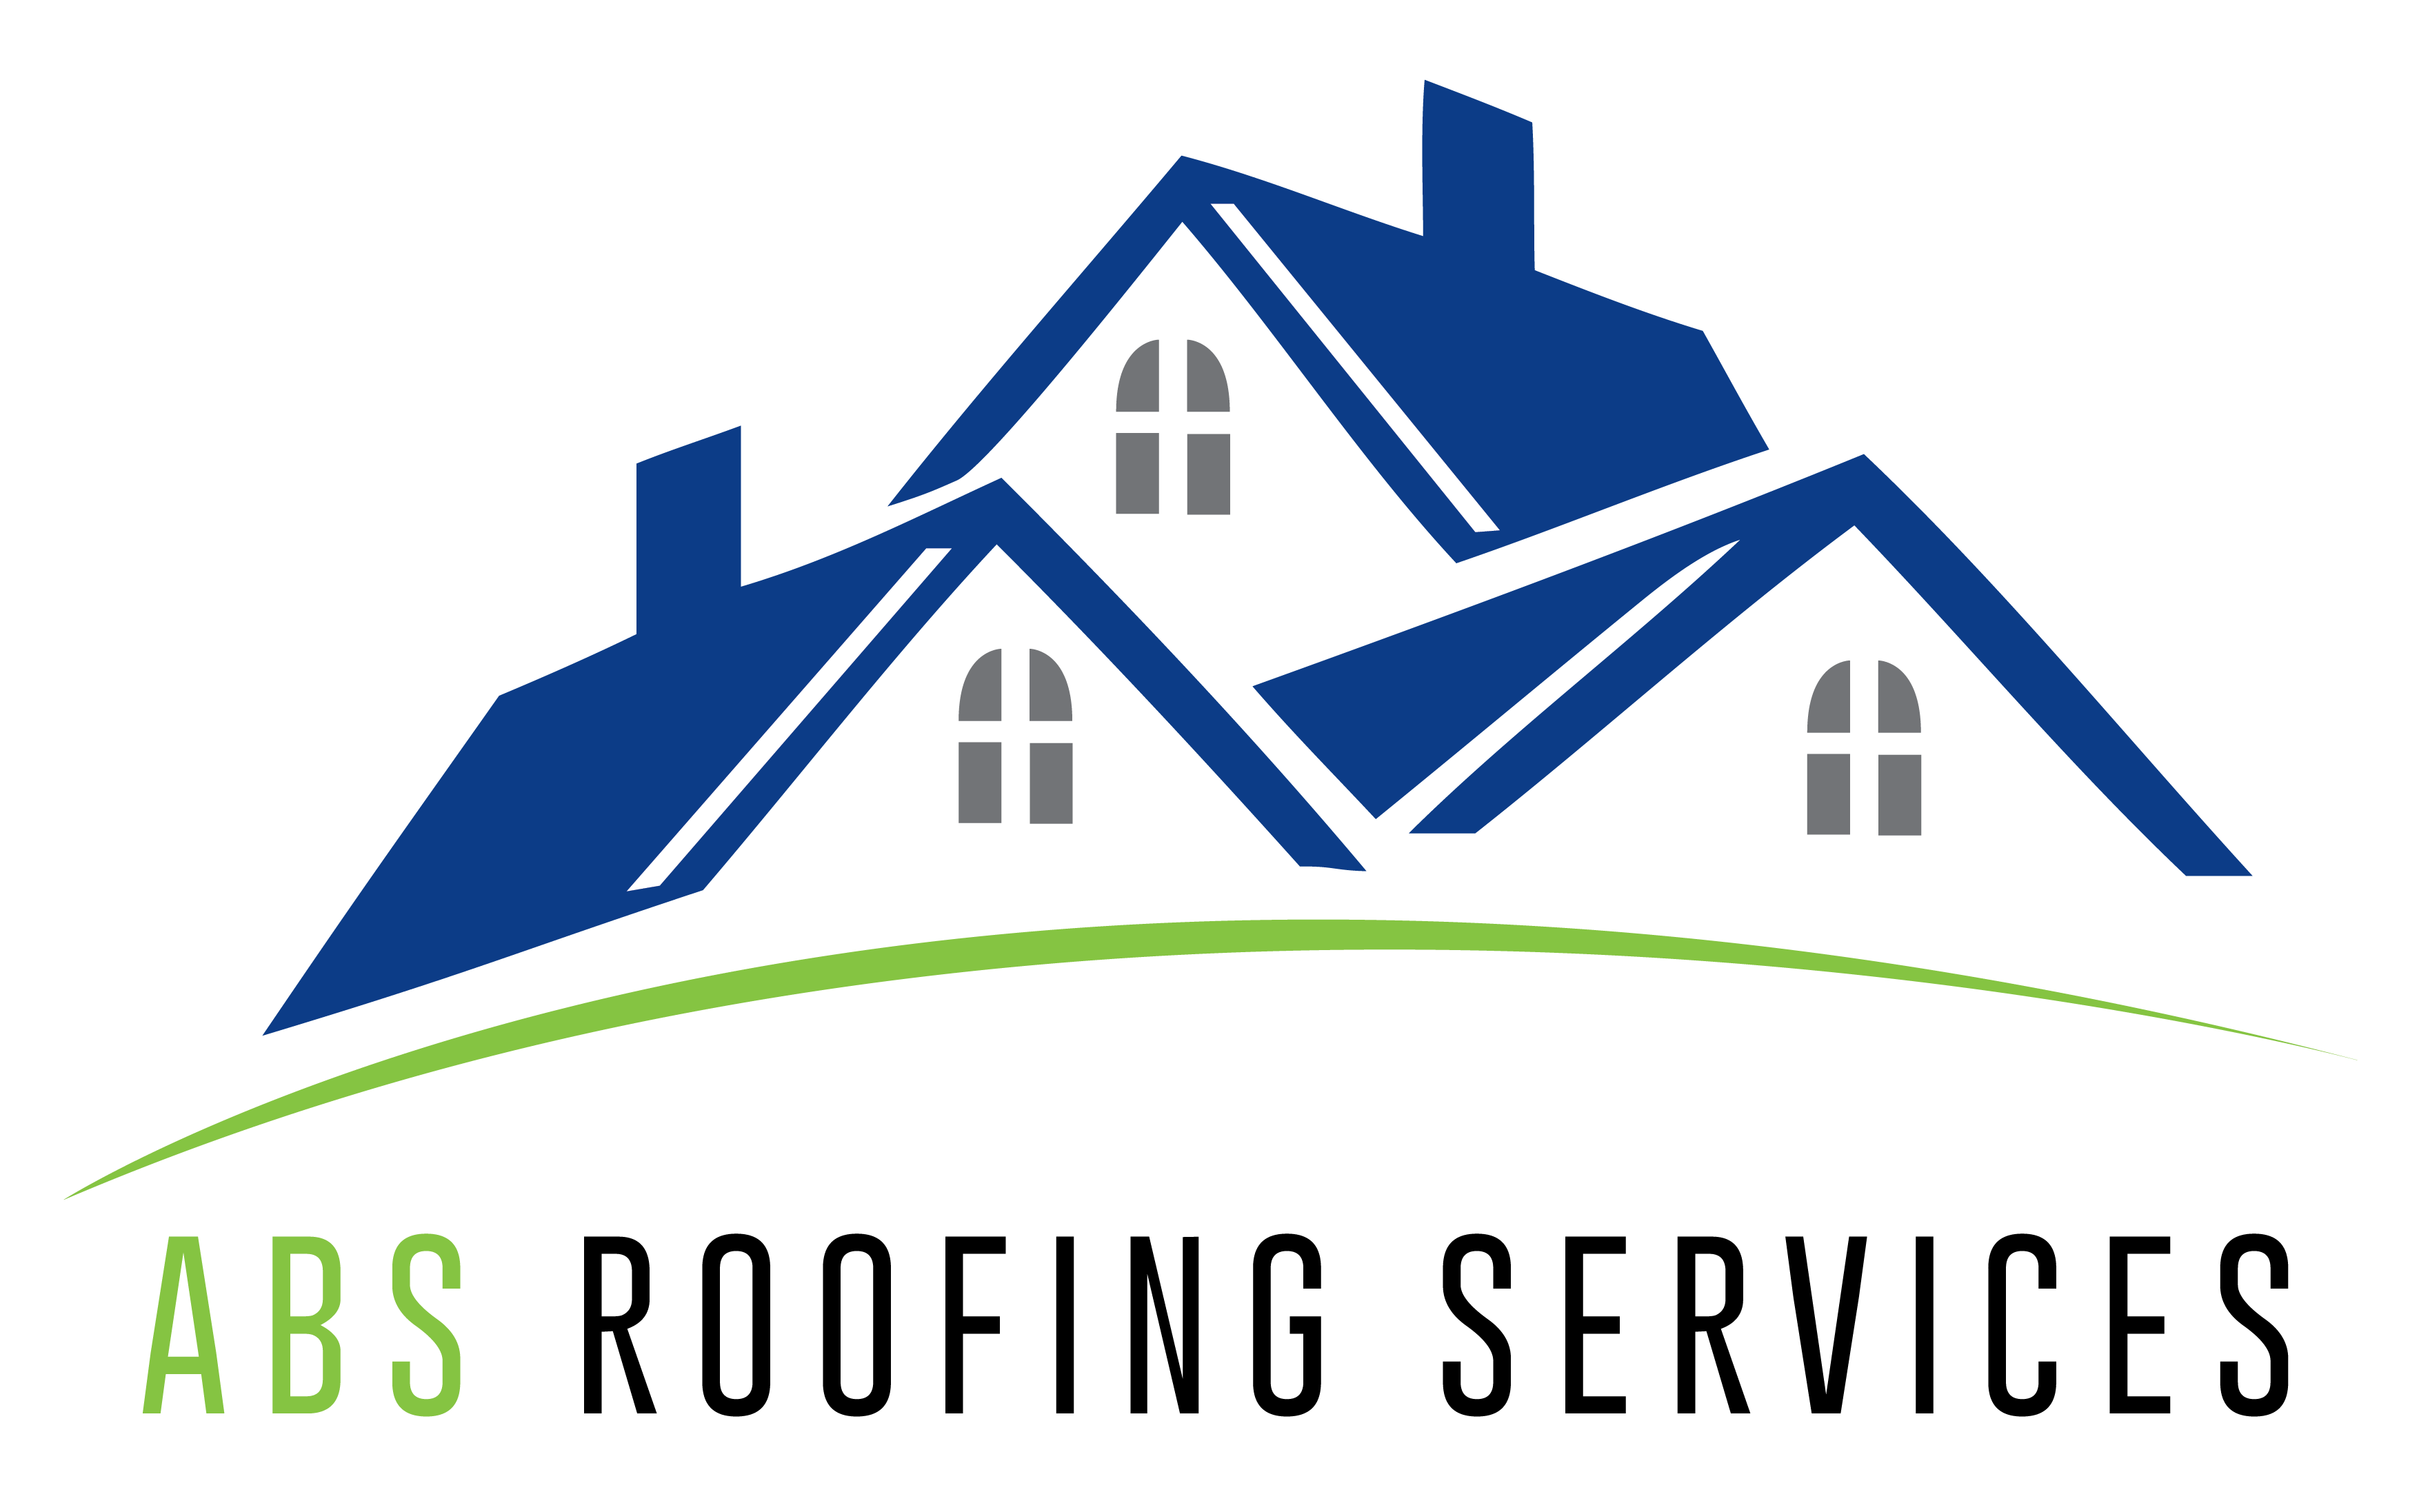 Home Roof Logo - Sydney Roof Repairs, Roofing Maintenance, Re Roofing Sydney, New